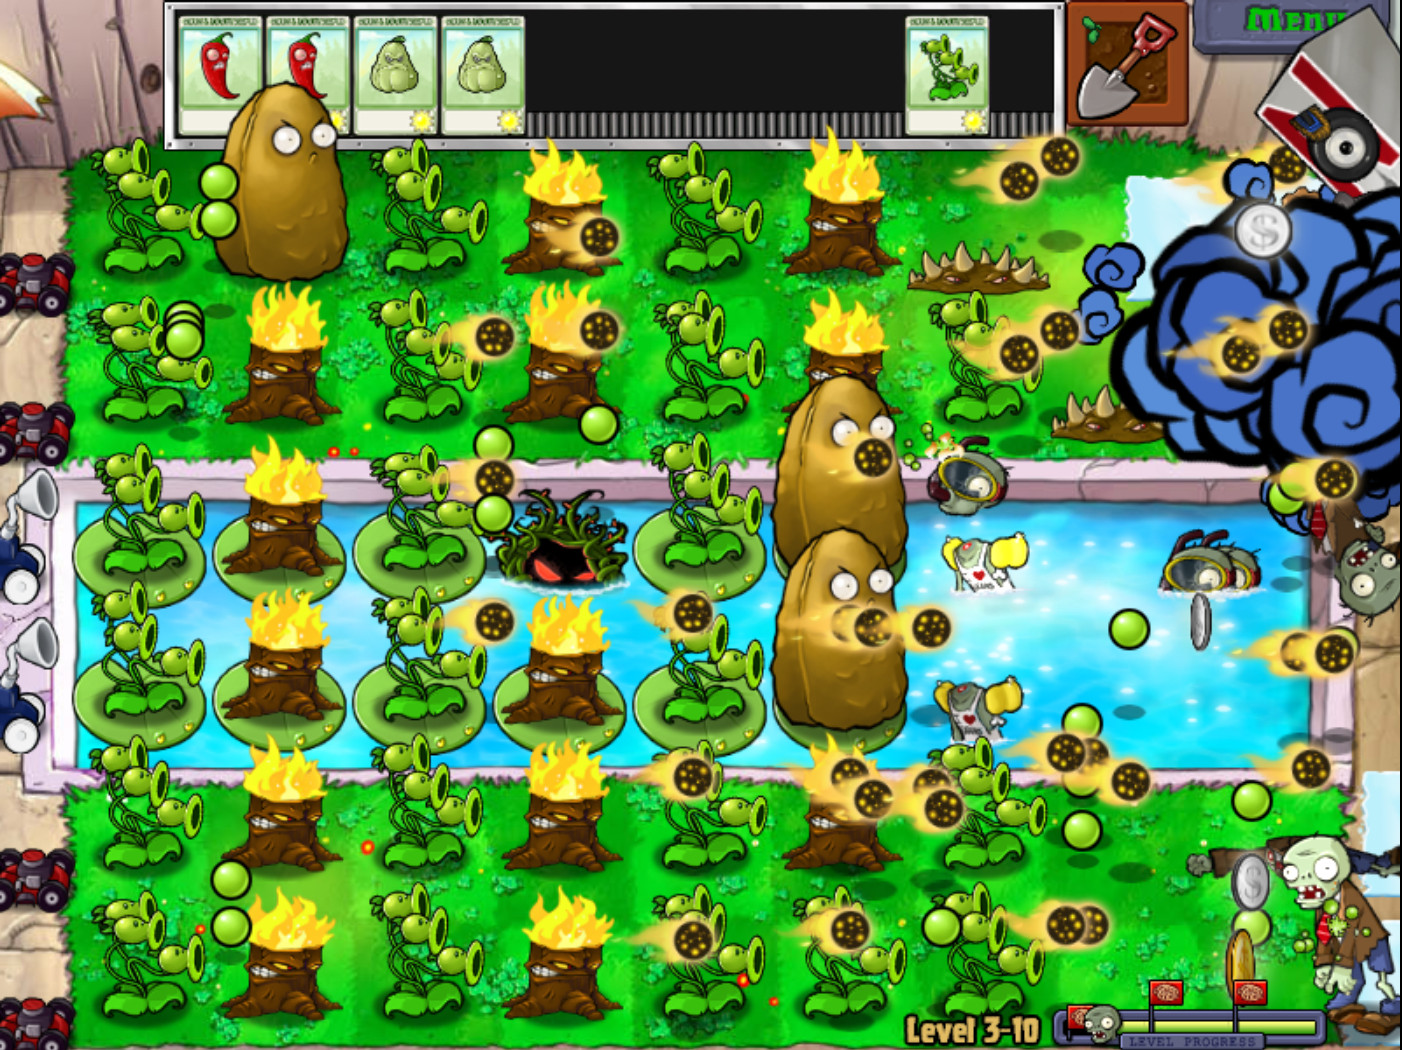 Plants vs Zombies 3 by Fistipuffs on DeviantArt